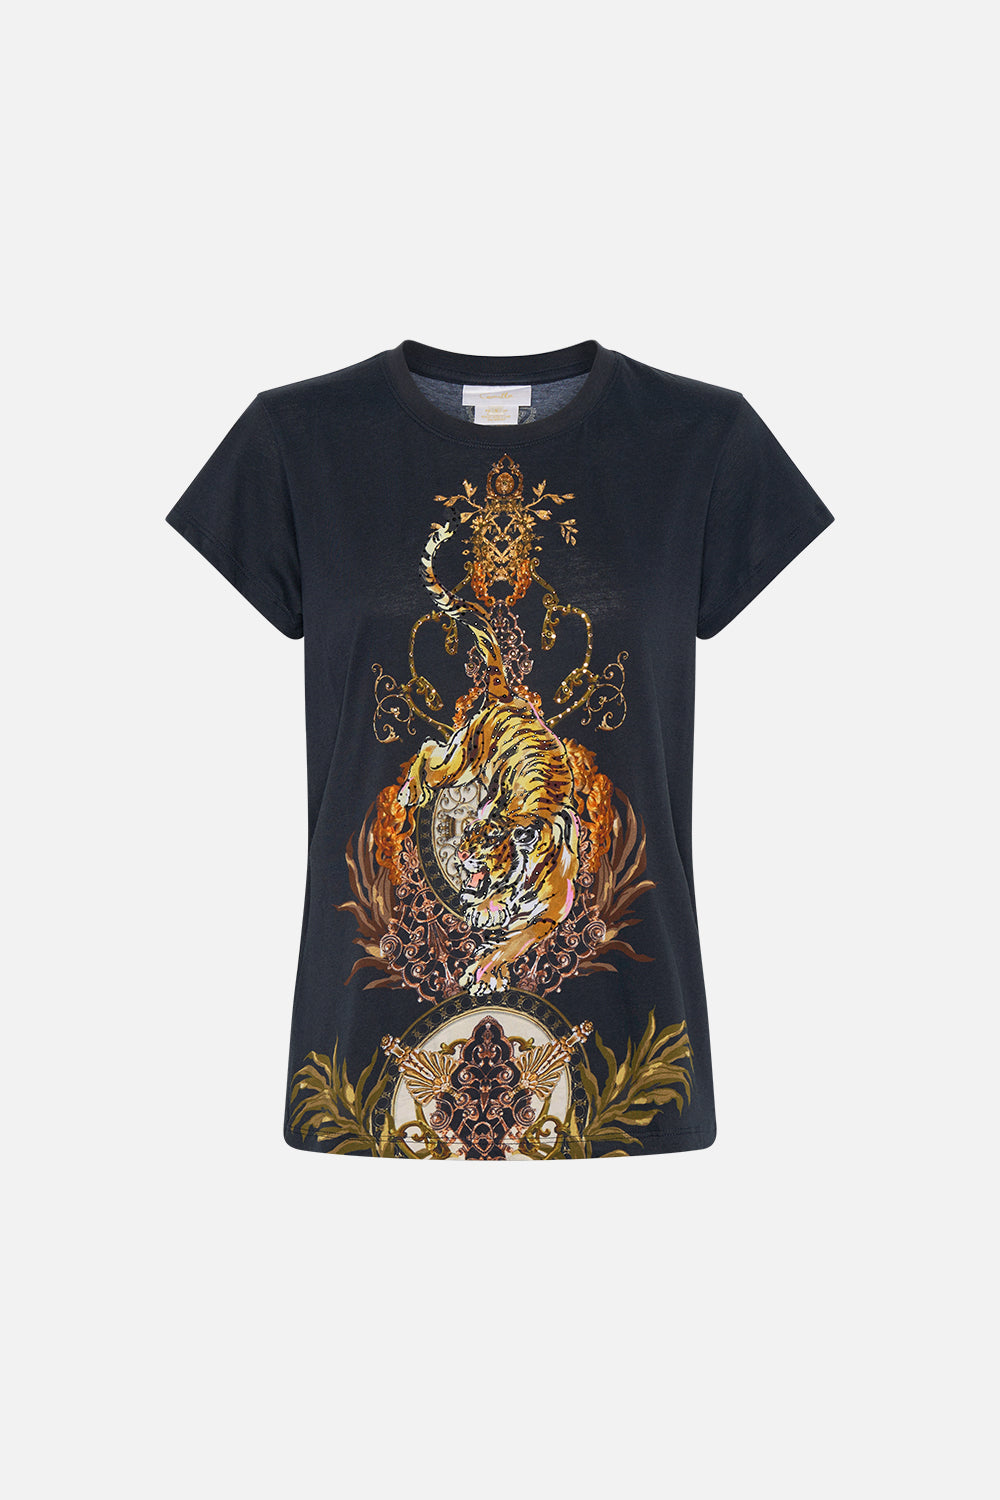 SLIM FIT ROUND NECK T-SHIRT THE QUEENS KING